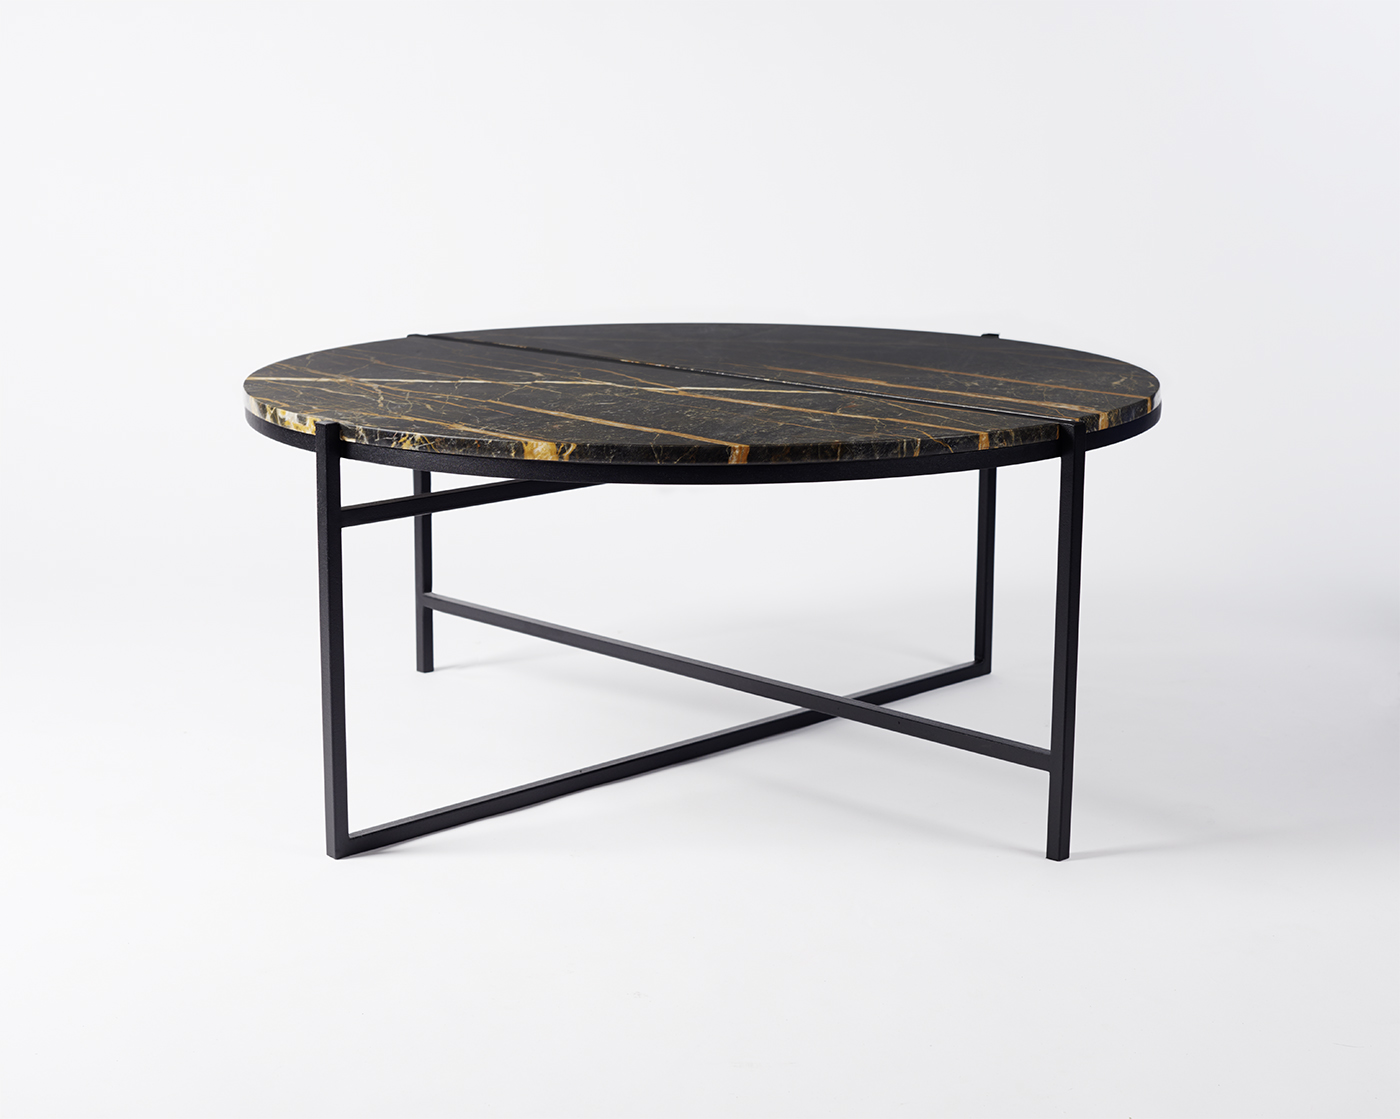 Other Way Round table by Isabell Gatzen | Flodeau.com